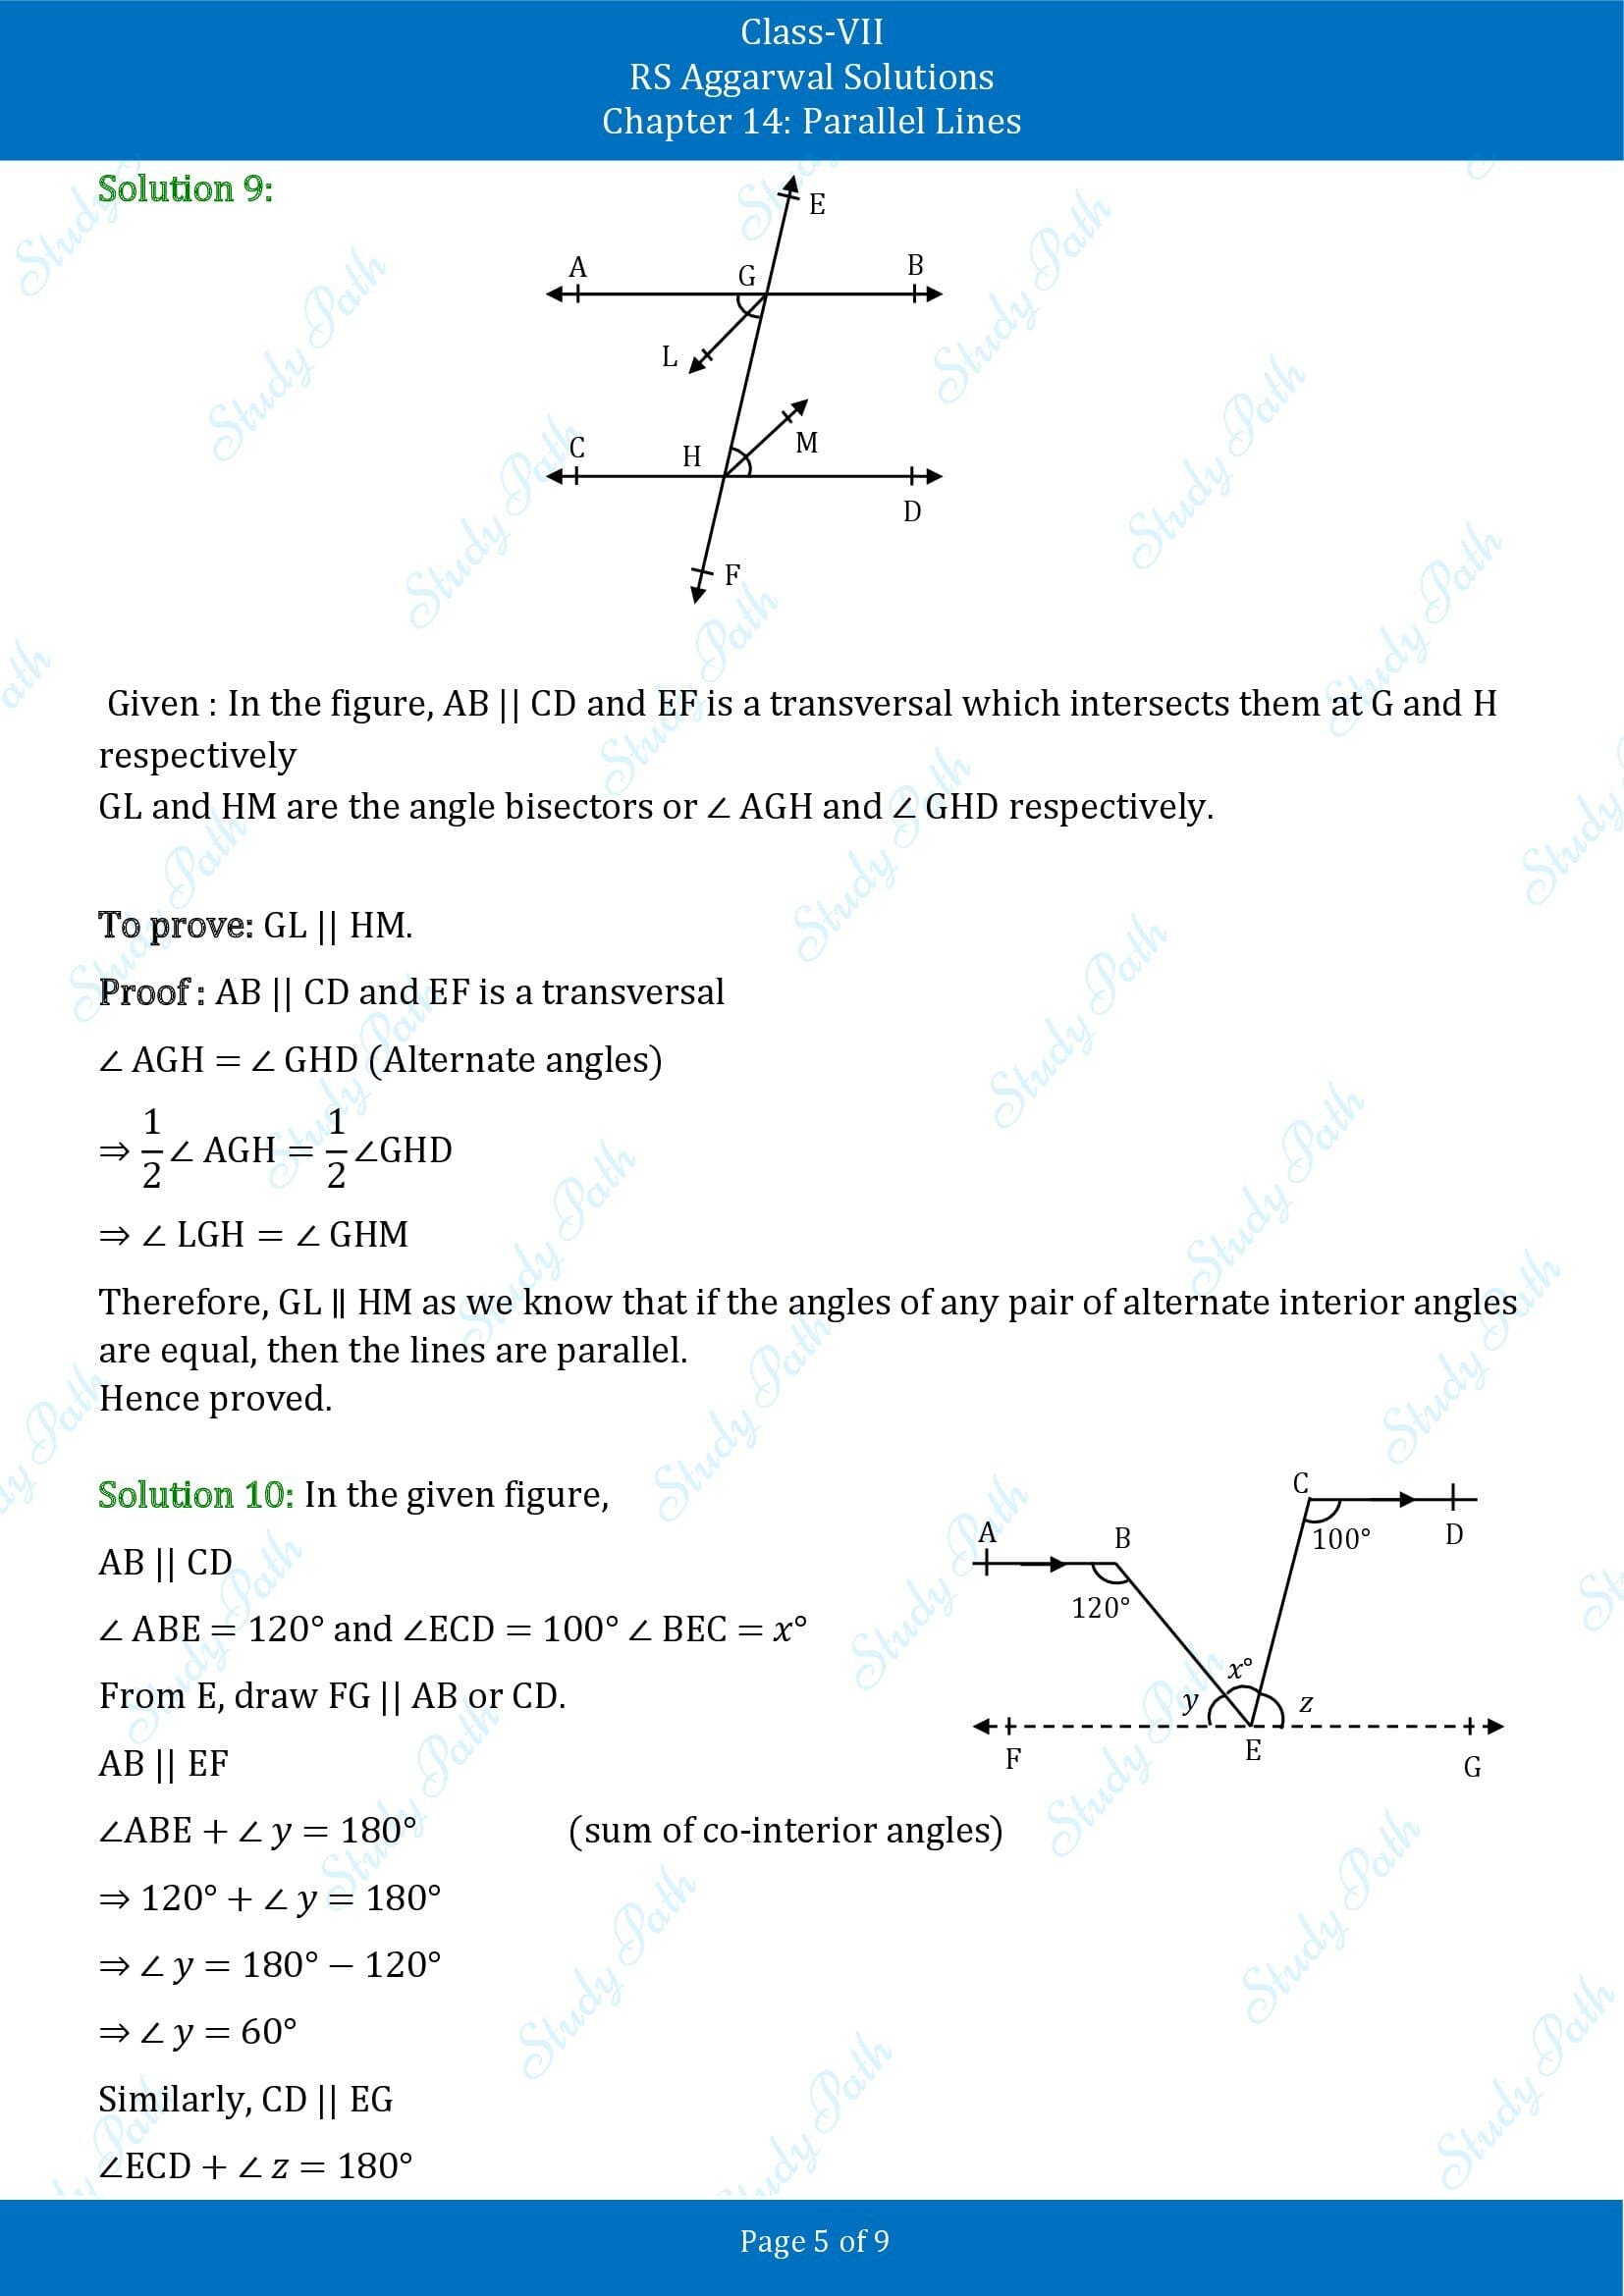 RS Aggarwal Solutions Class 7 Chapter 14 Parallel Lines 00005